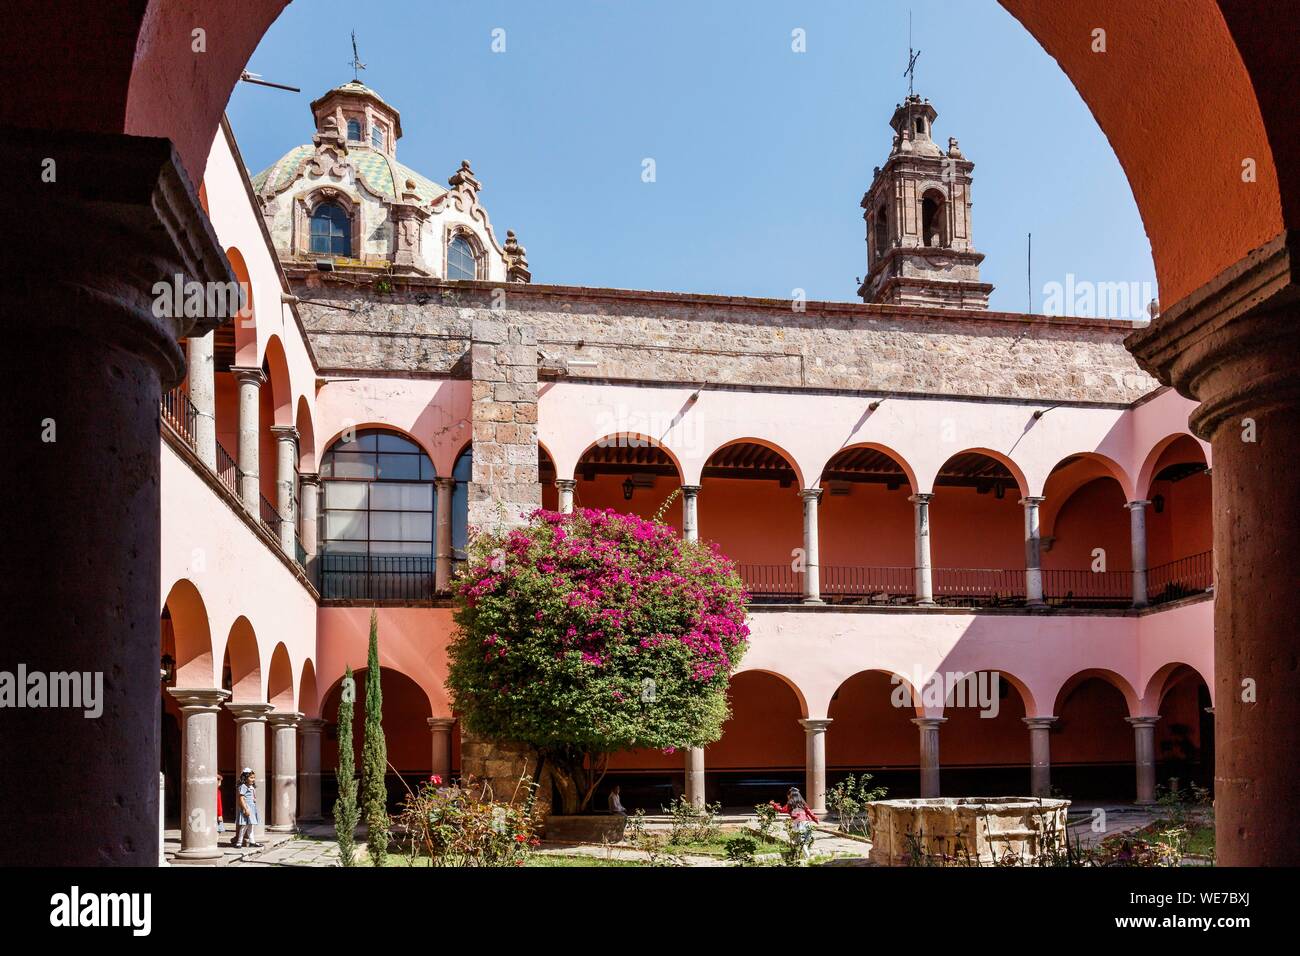 Mexico, Michoacan state, Morelia, Historic Centre of Morelia listed as World Heritage by UNESCO, La Merced church cloister Stock Photo